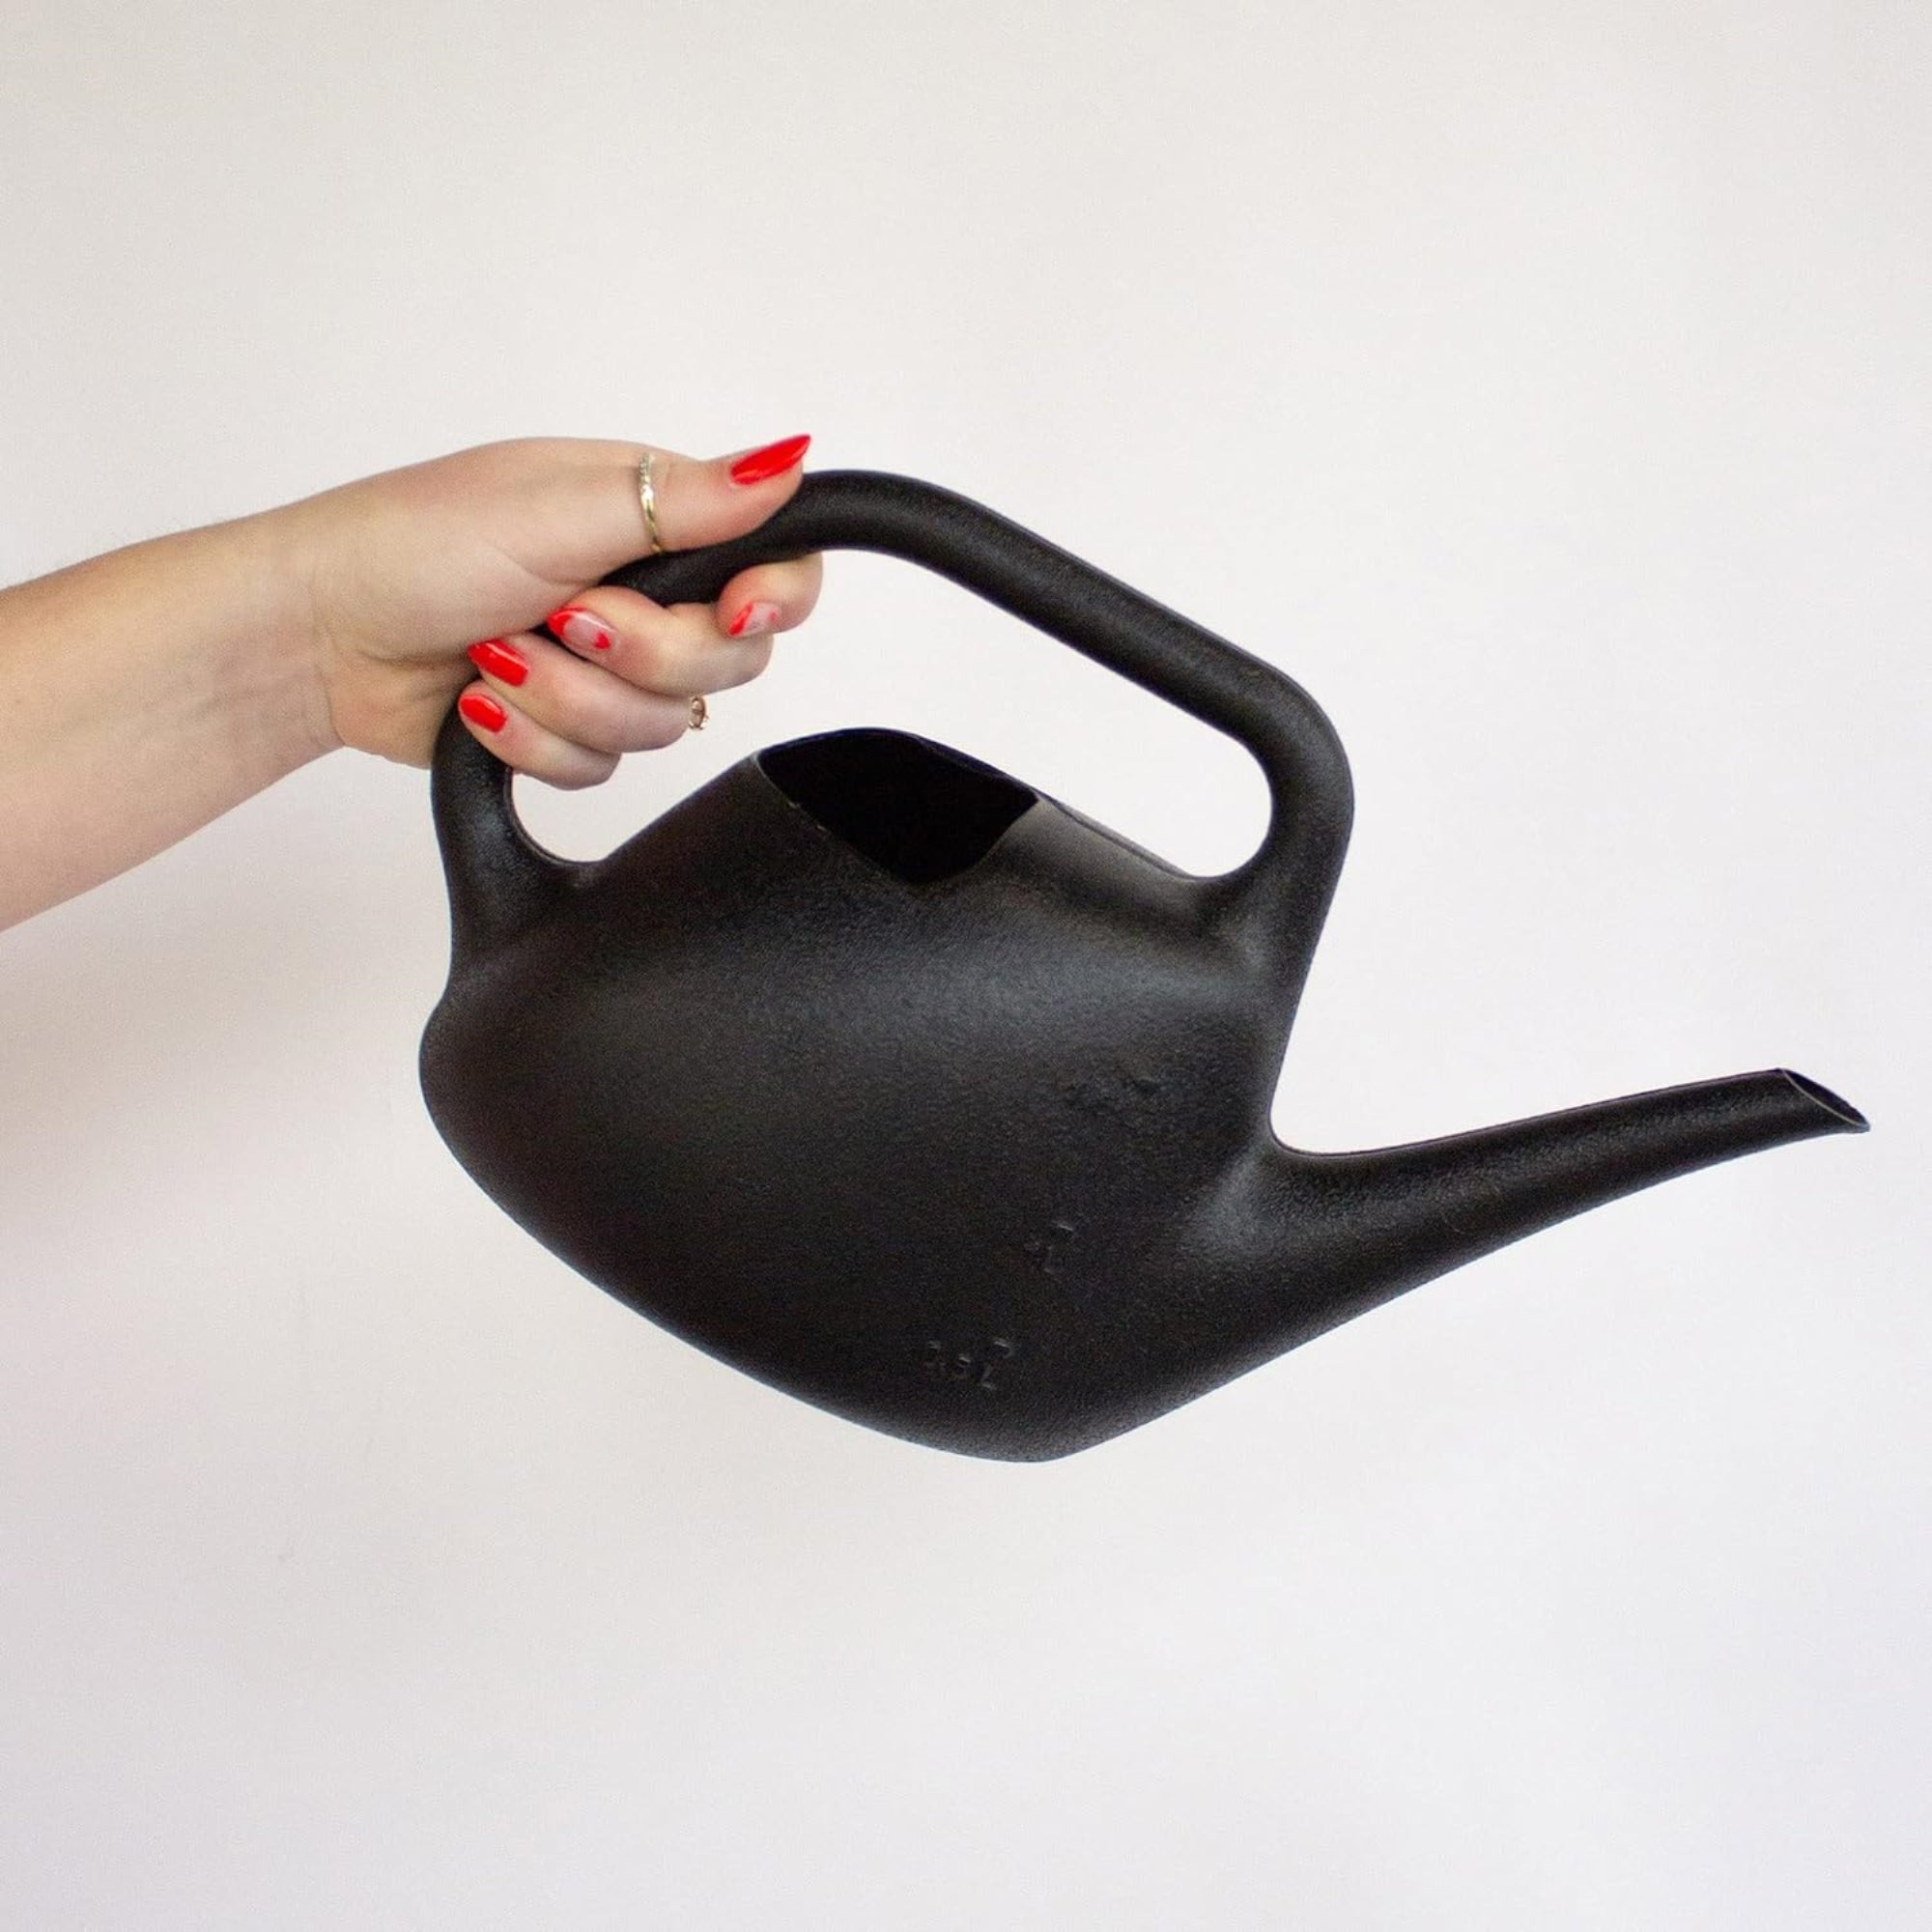 Bloem Indoor/Outdoor Resin Small Watering Can with Water Level Markings for Small Space Use, Black, 1.5L Capacity (0.4 Gallons)